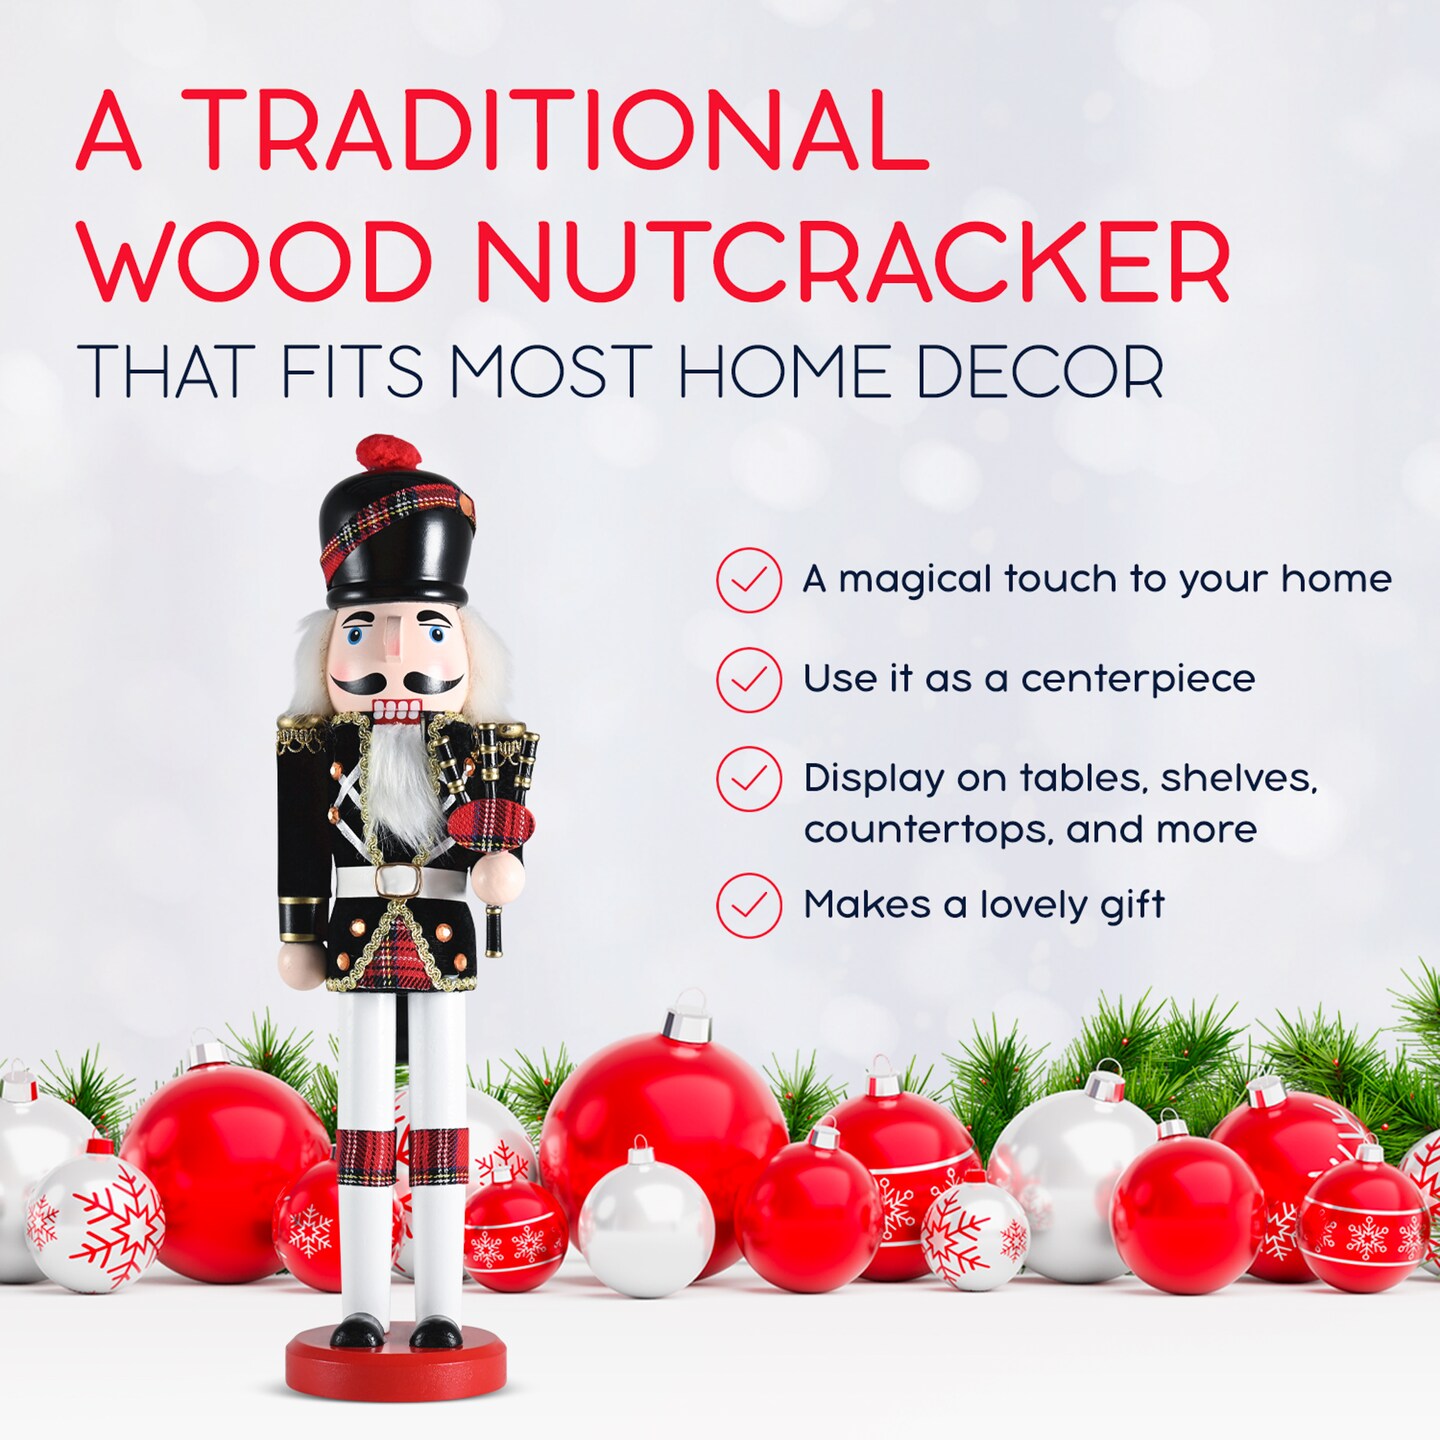 Ornativity Christmas Bagpipe Soldier Nutcracker &#x2013; Red and Black Wooden Nutcracker Soldier with Bagpipe Xmas Themed Holiday Nut Cracker Doll Figure Decorations